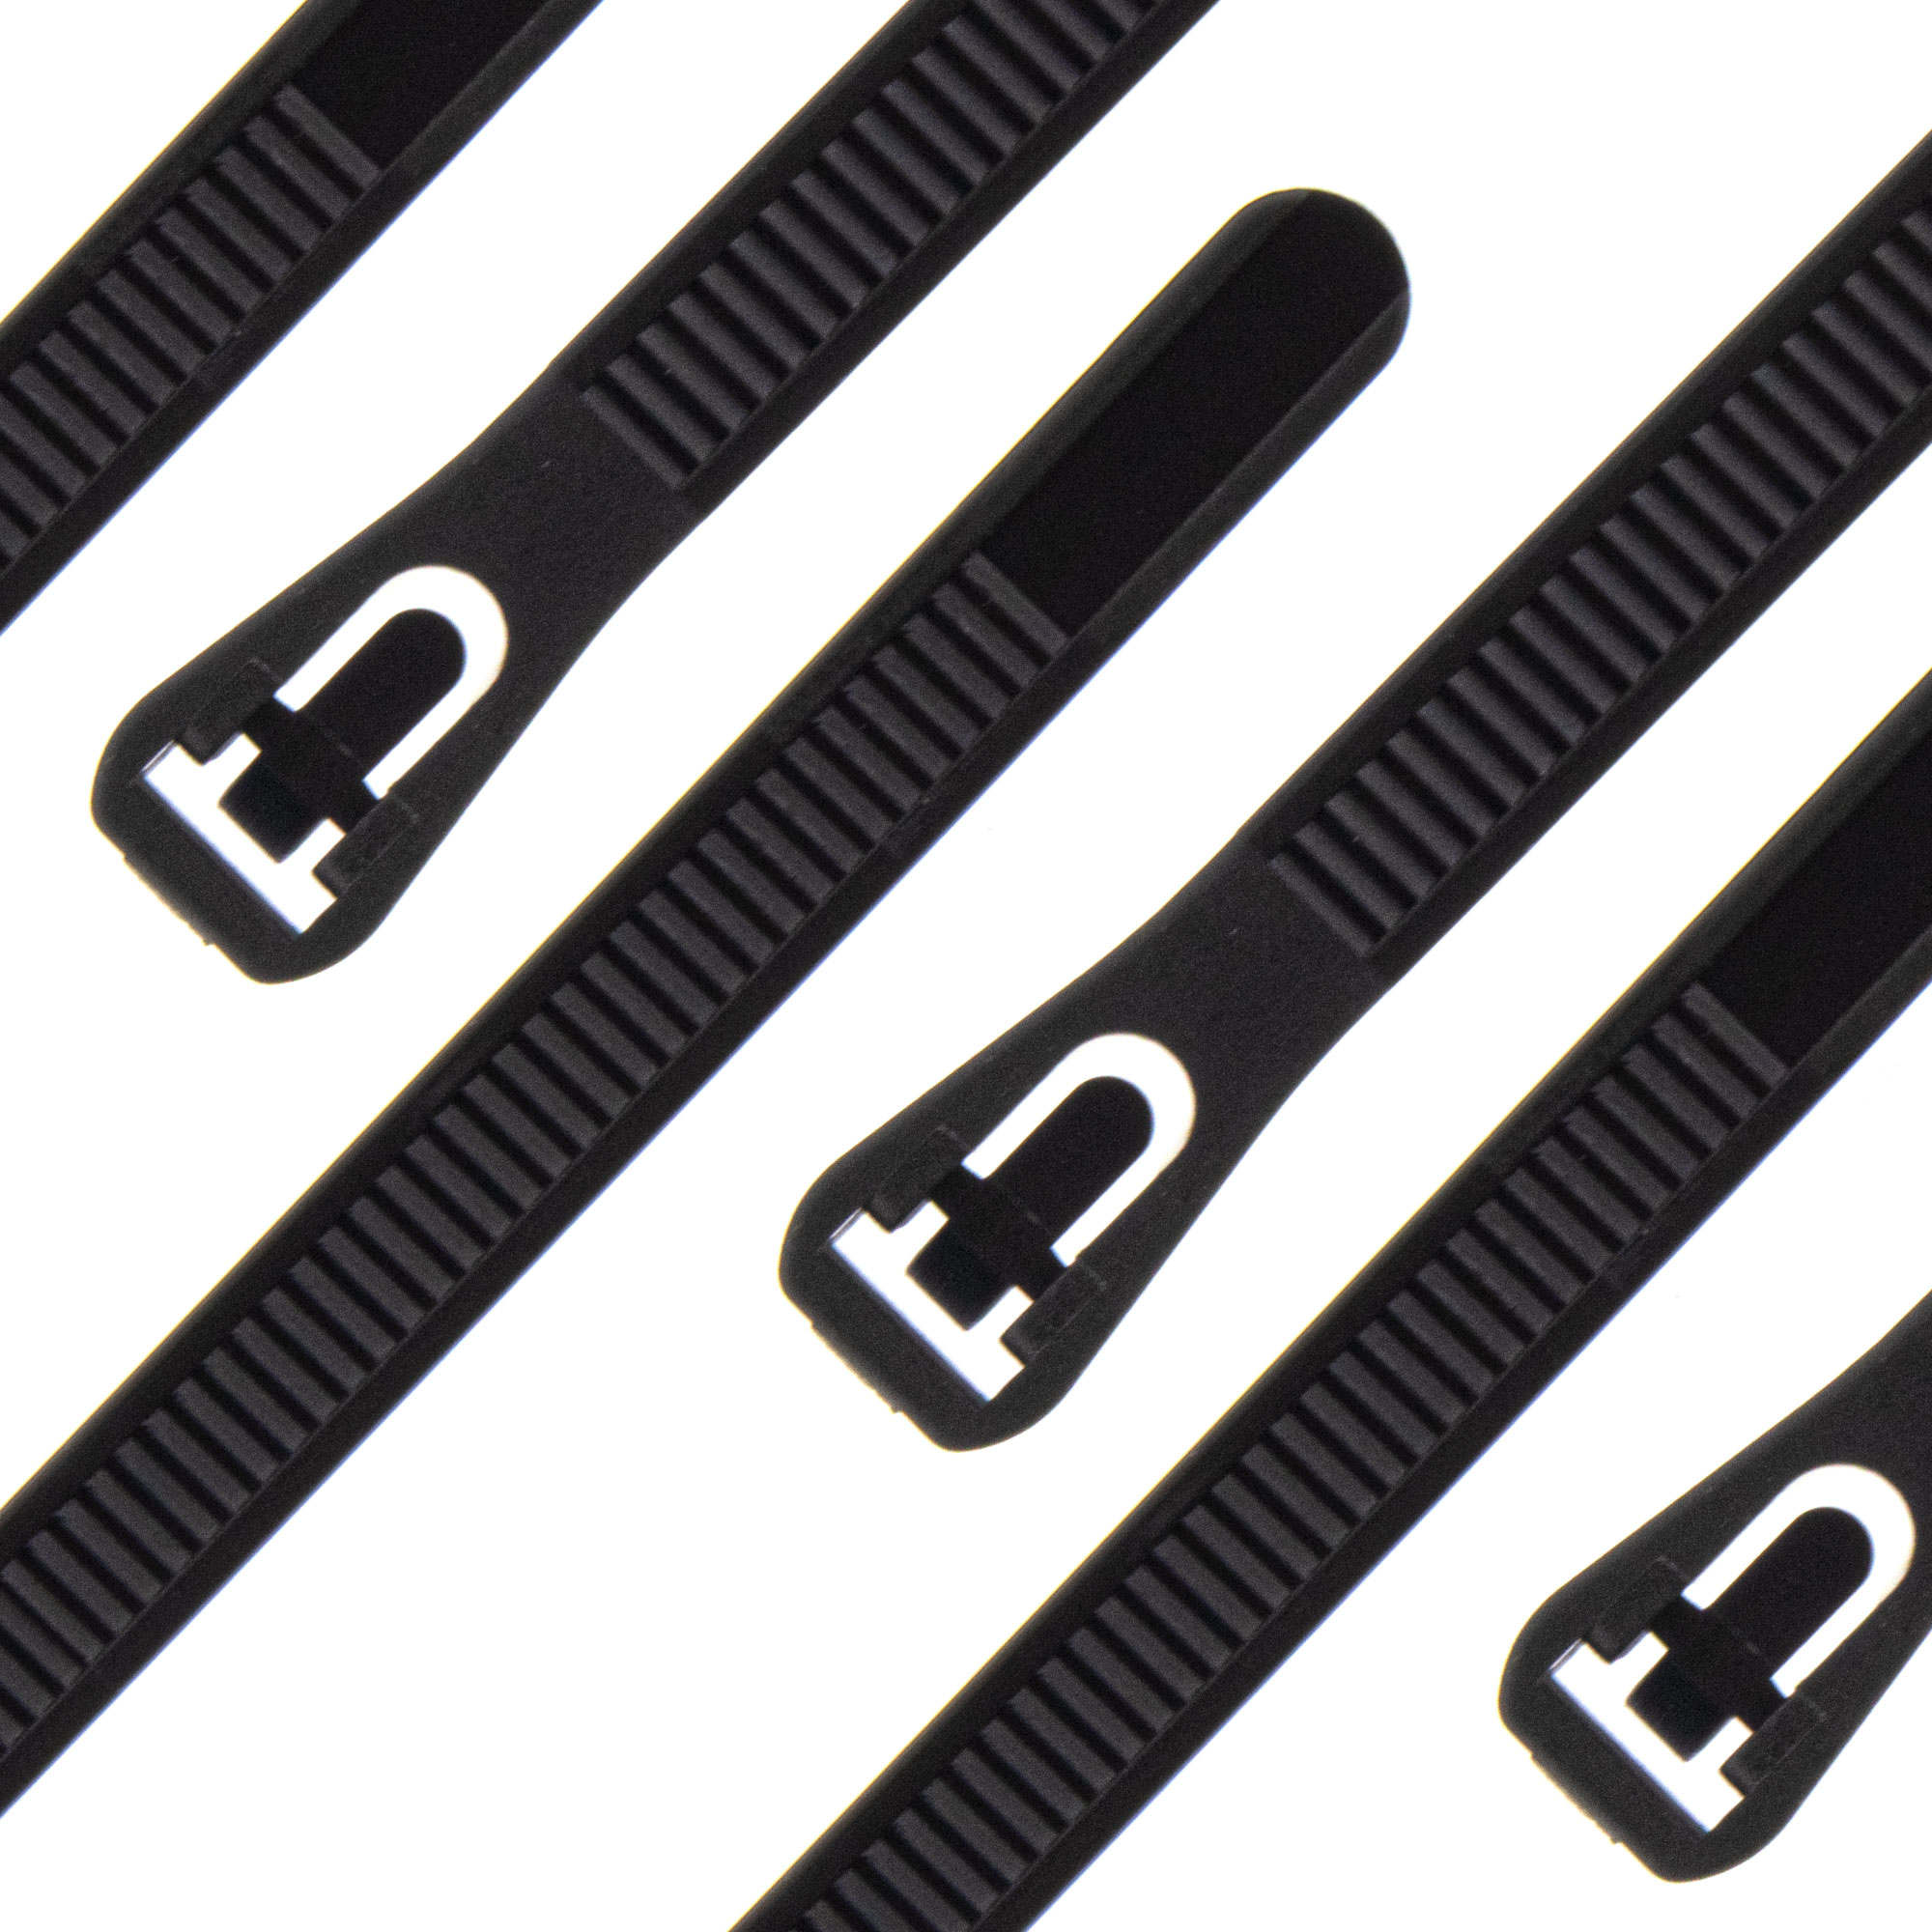 Cable tie re-use-able 300 x 7,6mm, black, 100PCS